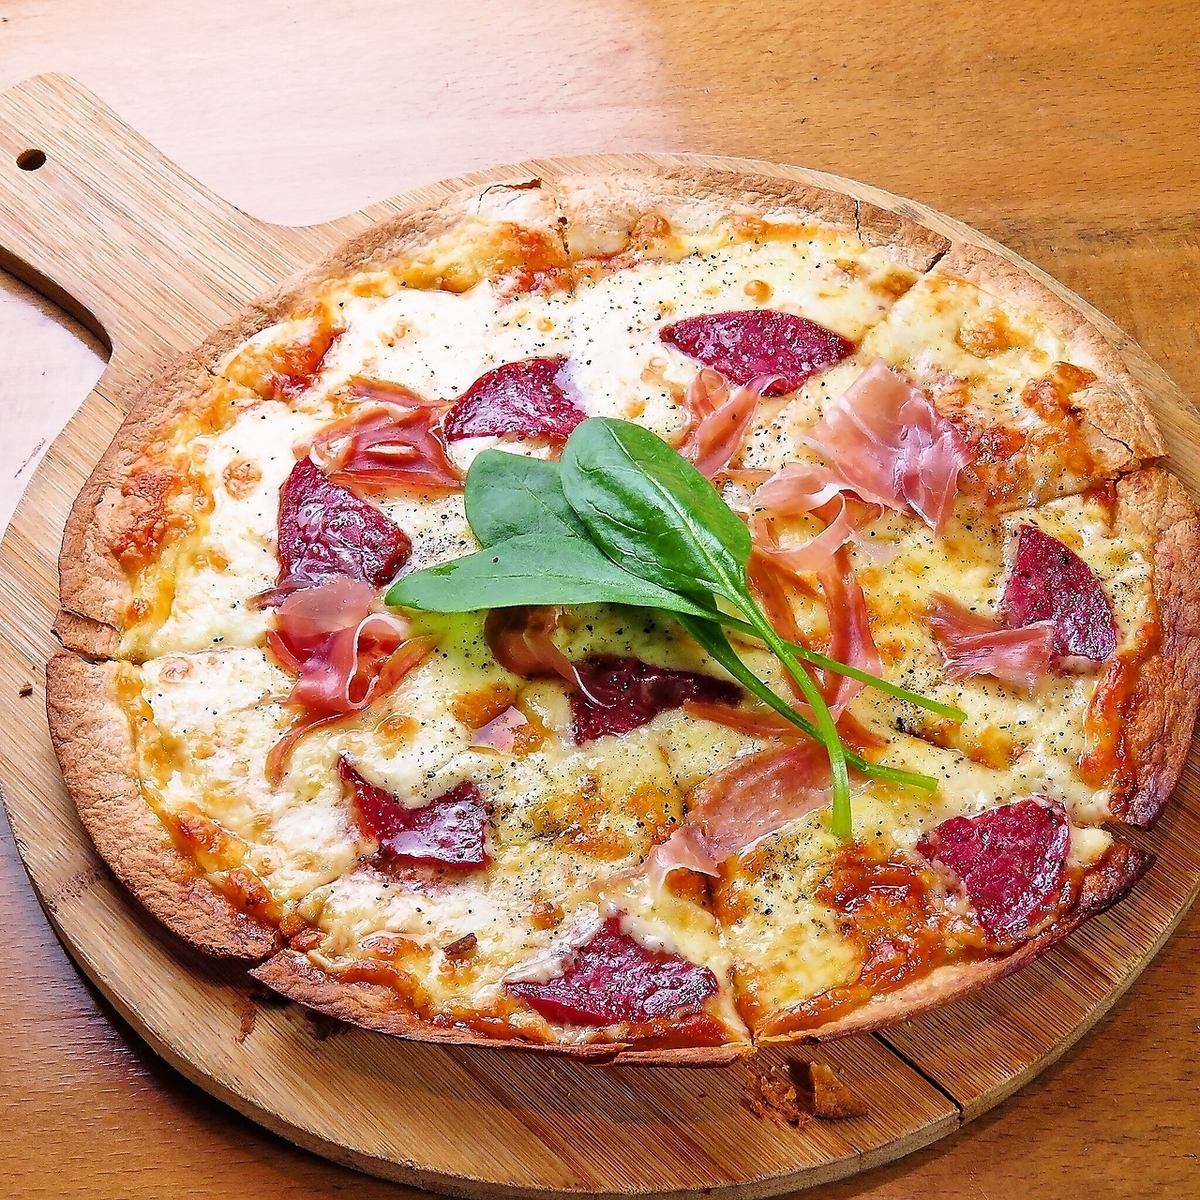 All-you-can-eat and all-you-can-drink pizza and pasta ★ Enjoy Western-style dumplings for 3000 yen